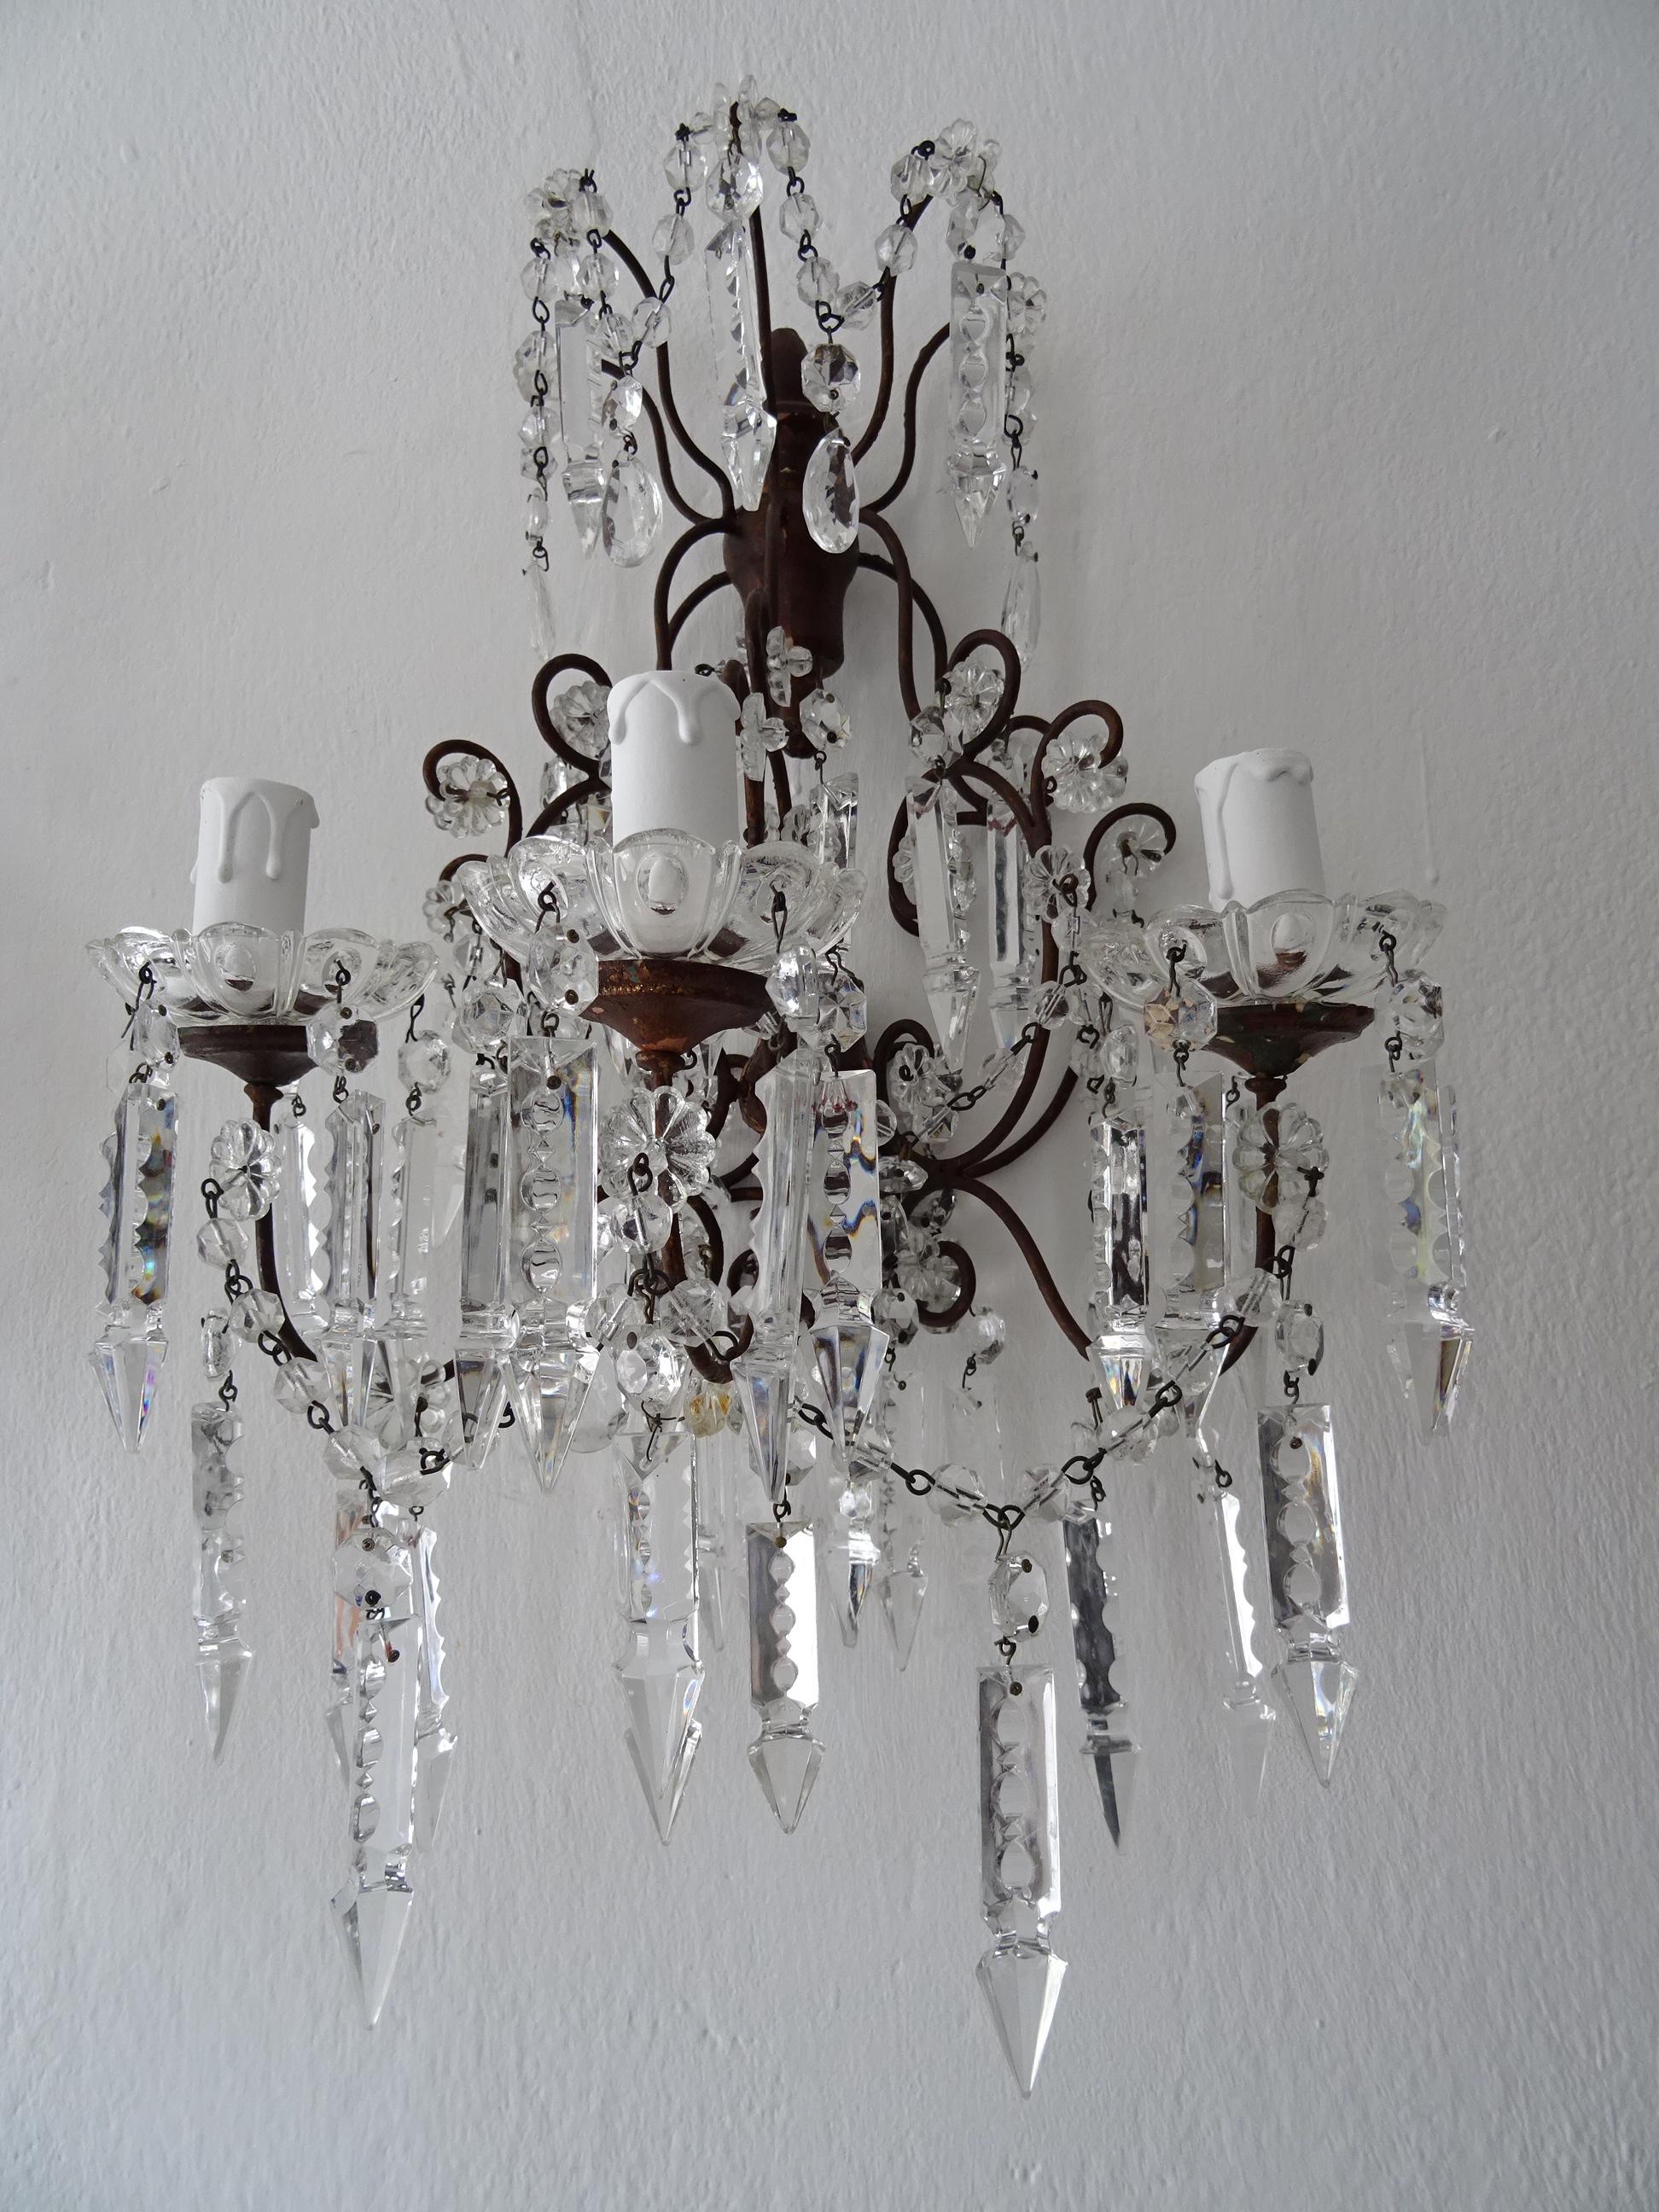 Big French Baroque Loaded Crystal Spears Prisms 3 Light  Sconces c 1900 For Sale 1